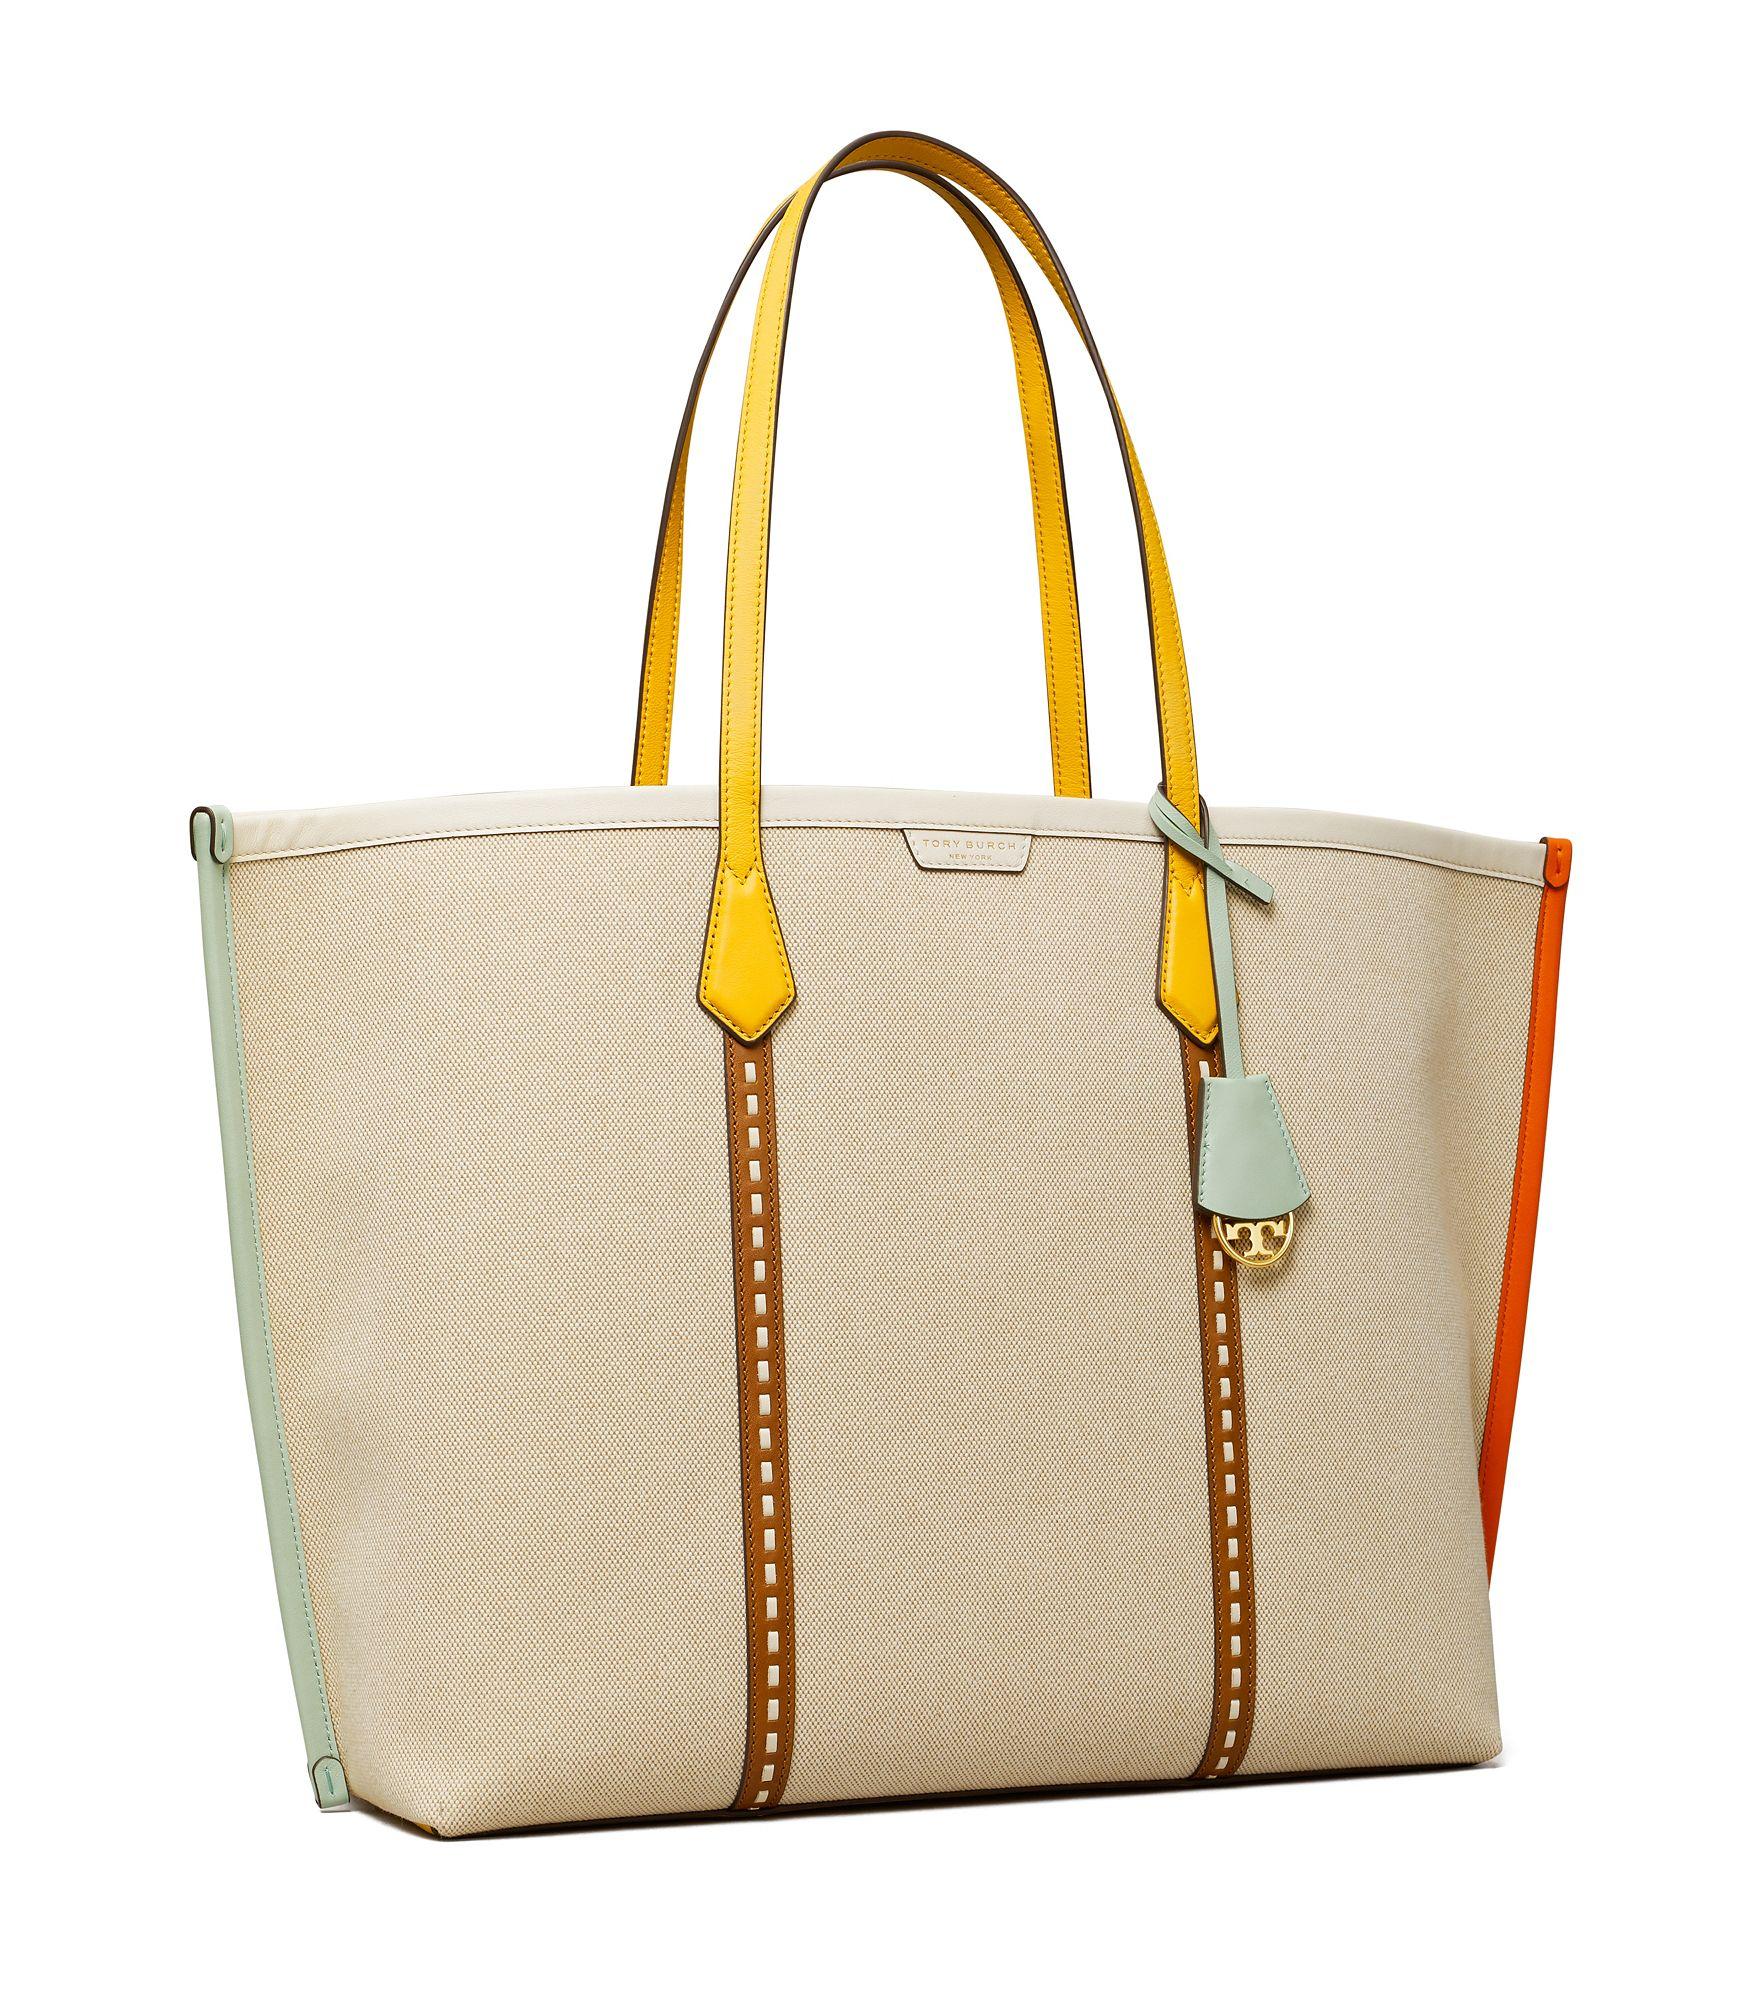 Tory Burch Perry Canvas Oversized Tote Bag in Natural | Lyst